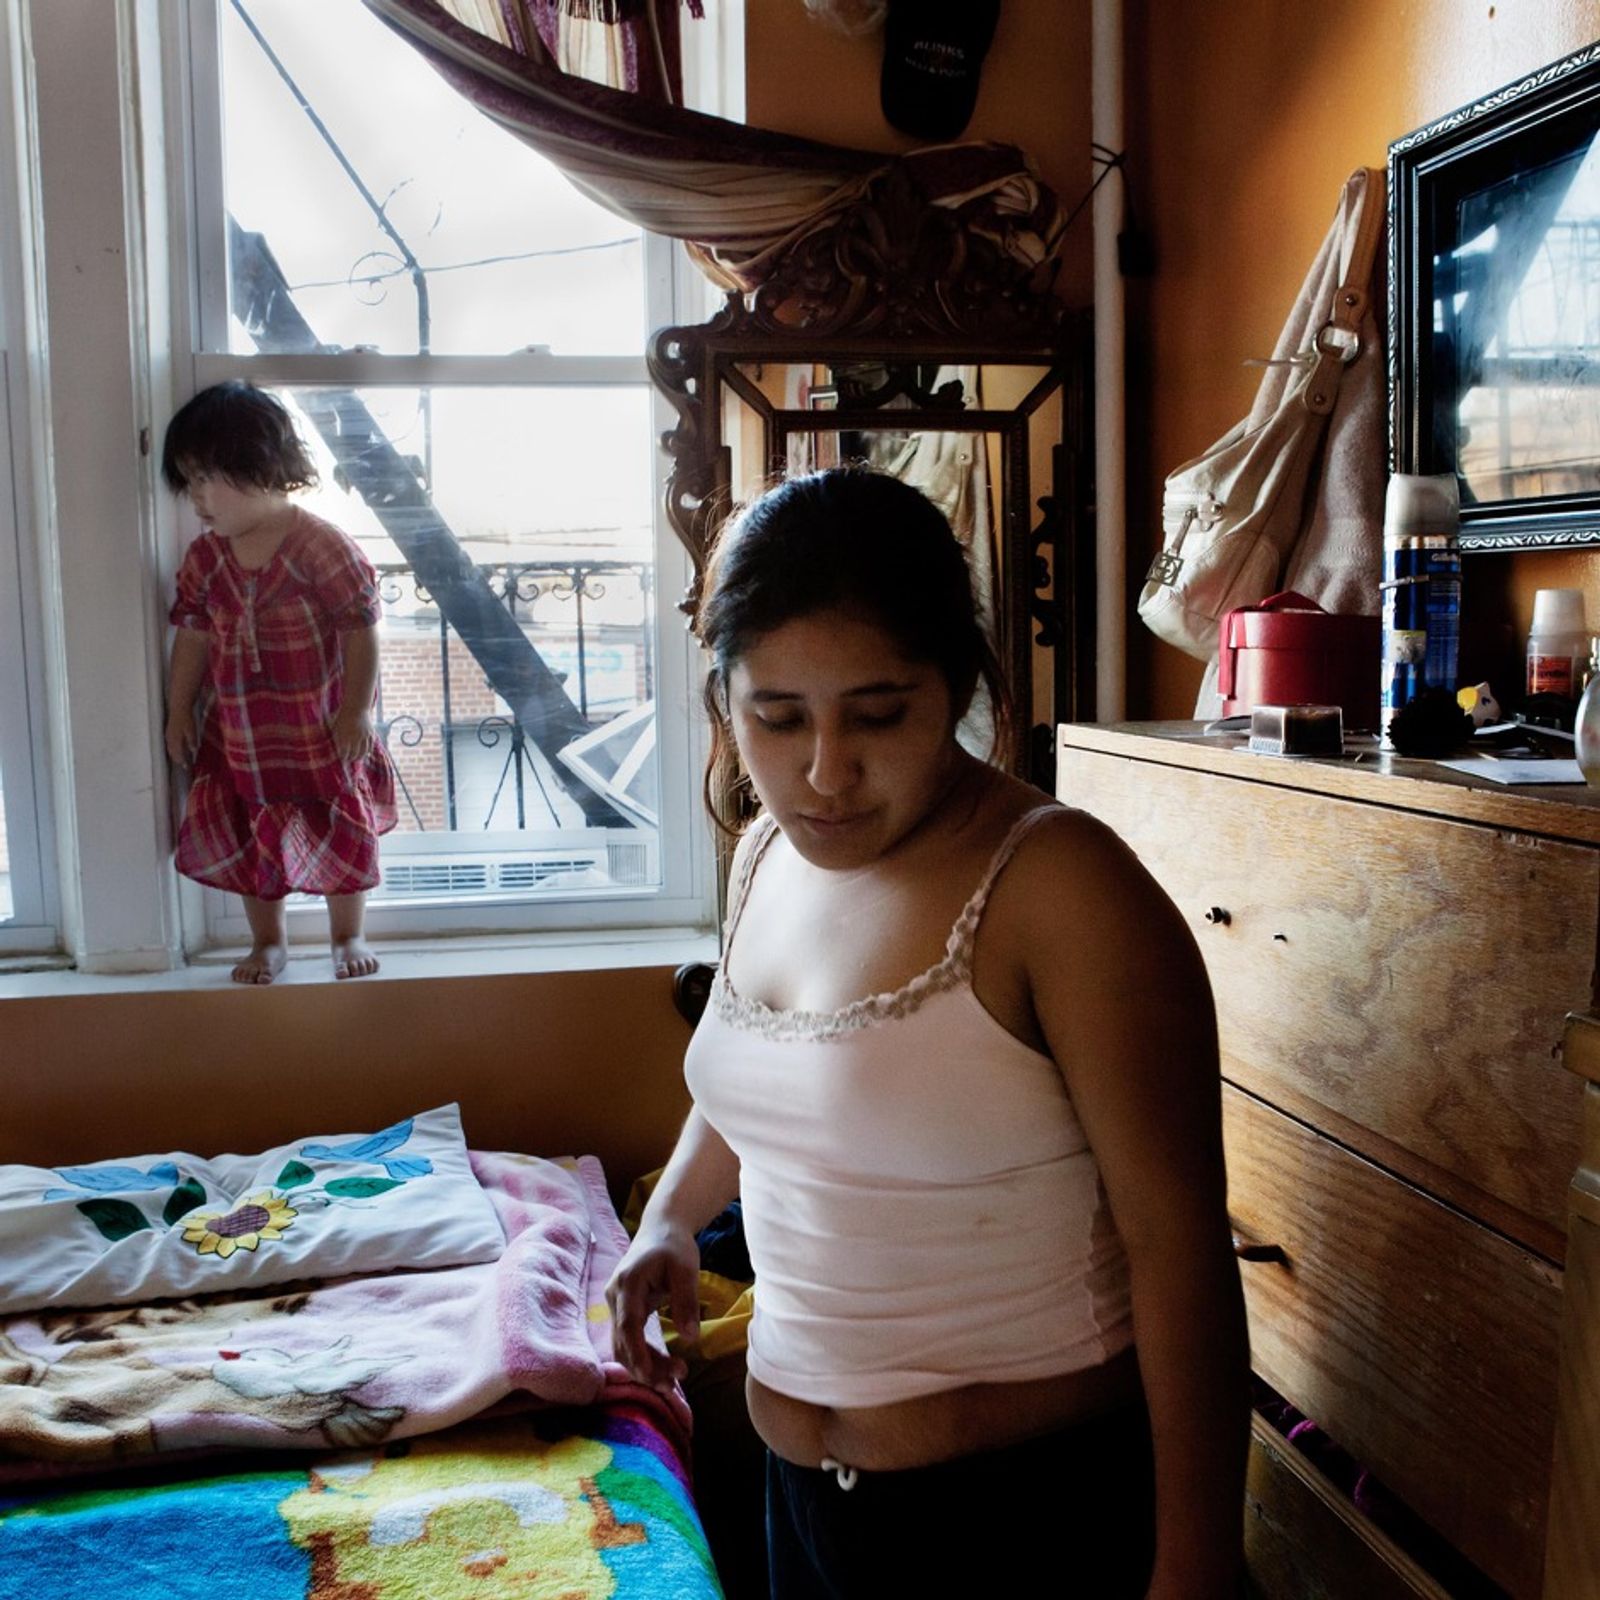 © Ruth Prieto - Juanita on her daily activities while her daugther Lluvia plays around the window and the bed.